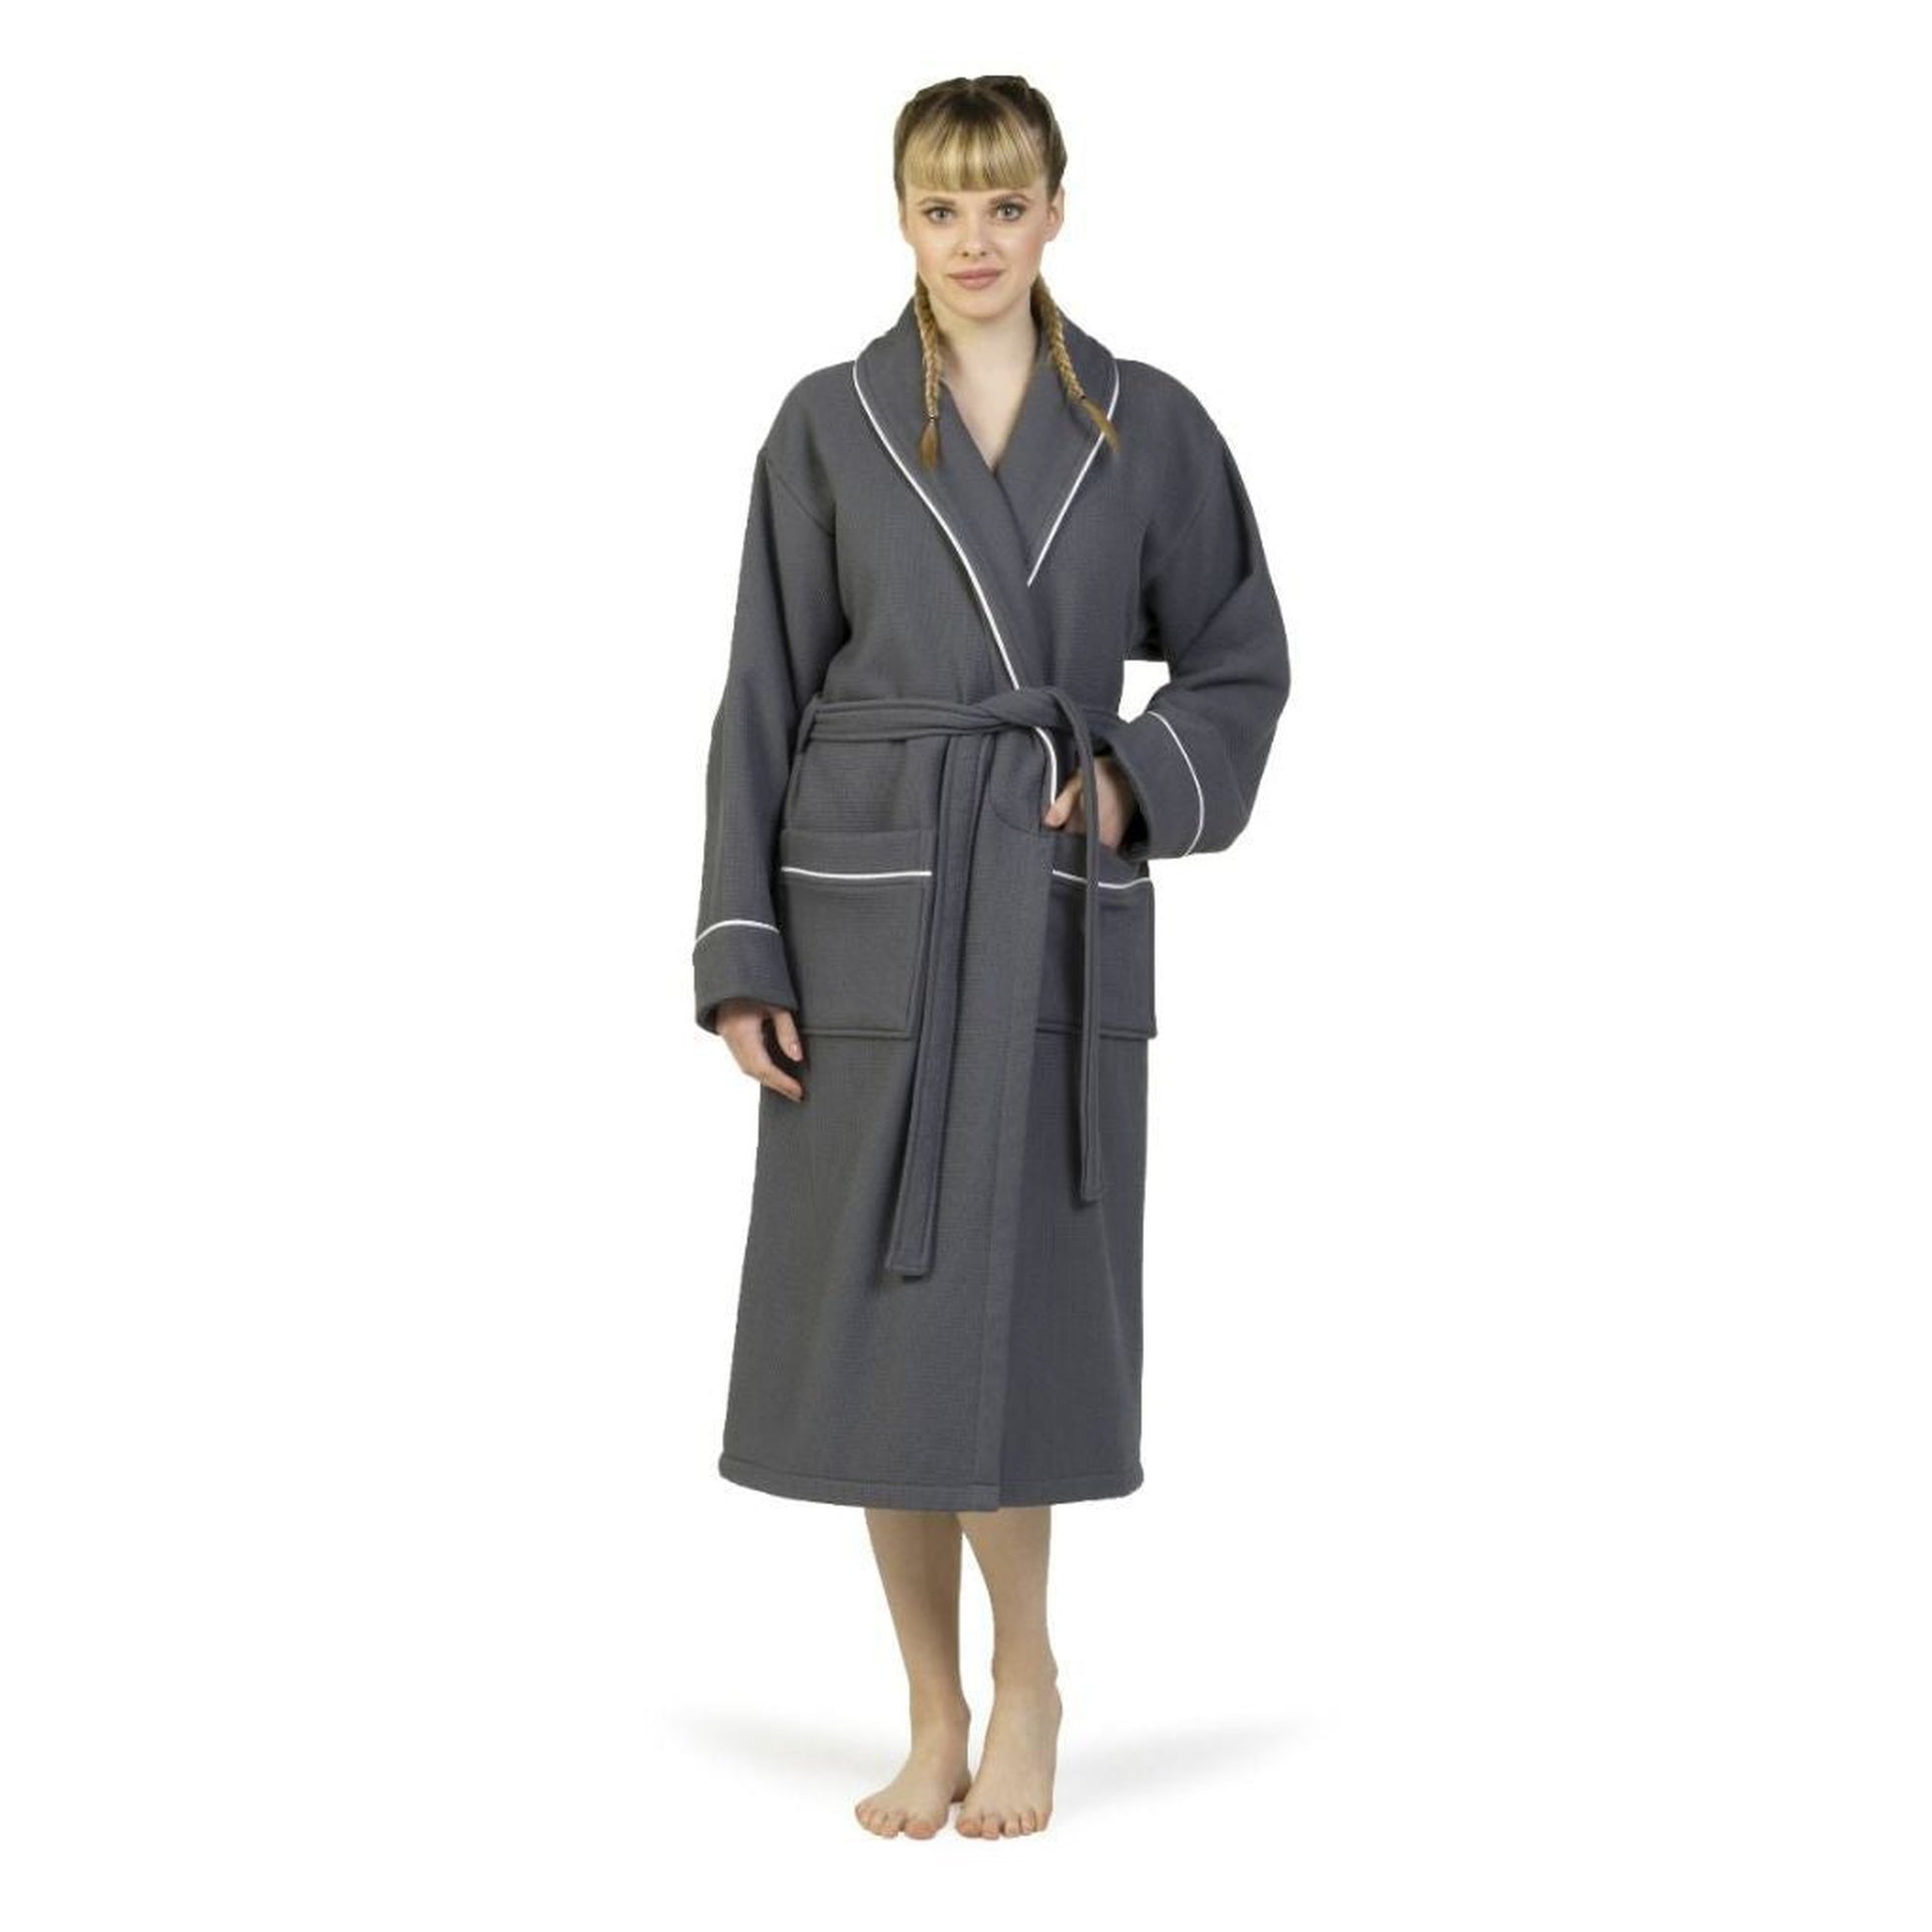 Linum Waffle Terry with Satin Piped Trim S/M Grey Bathrobe